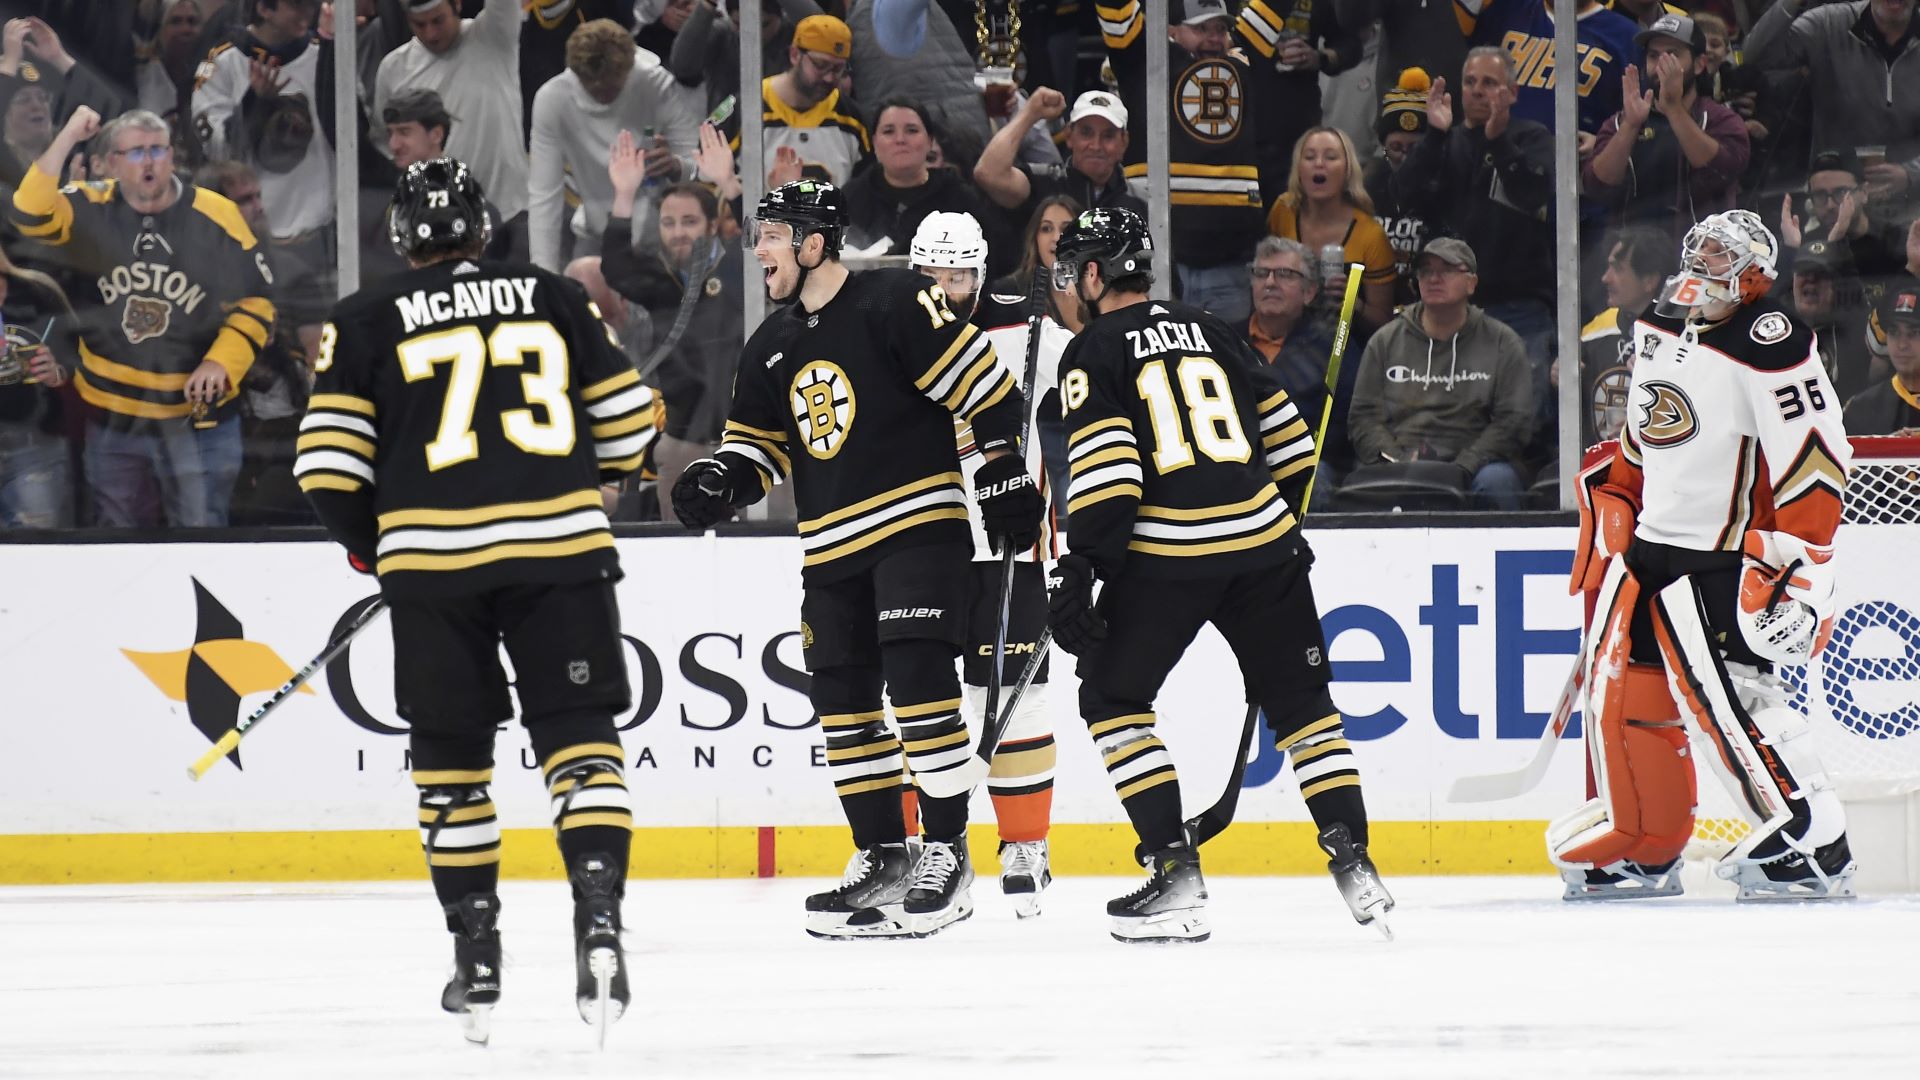 Charlie Coyle Focused On Opportunity To Grow With Bruins